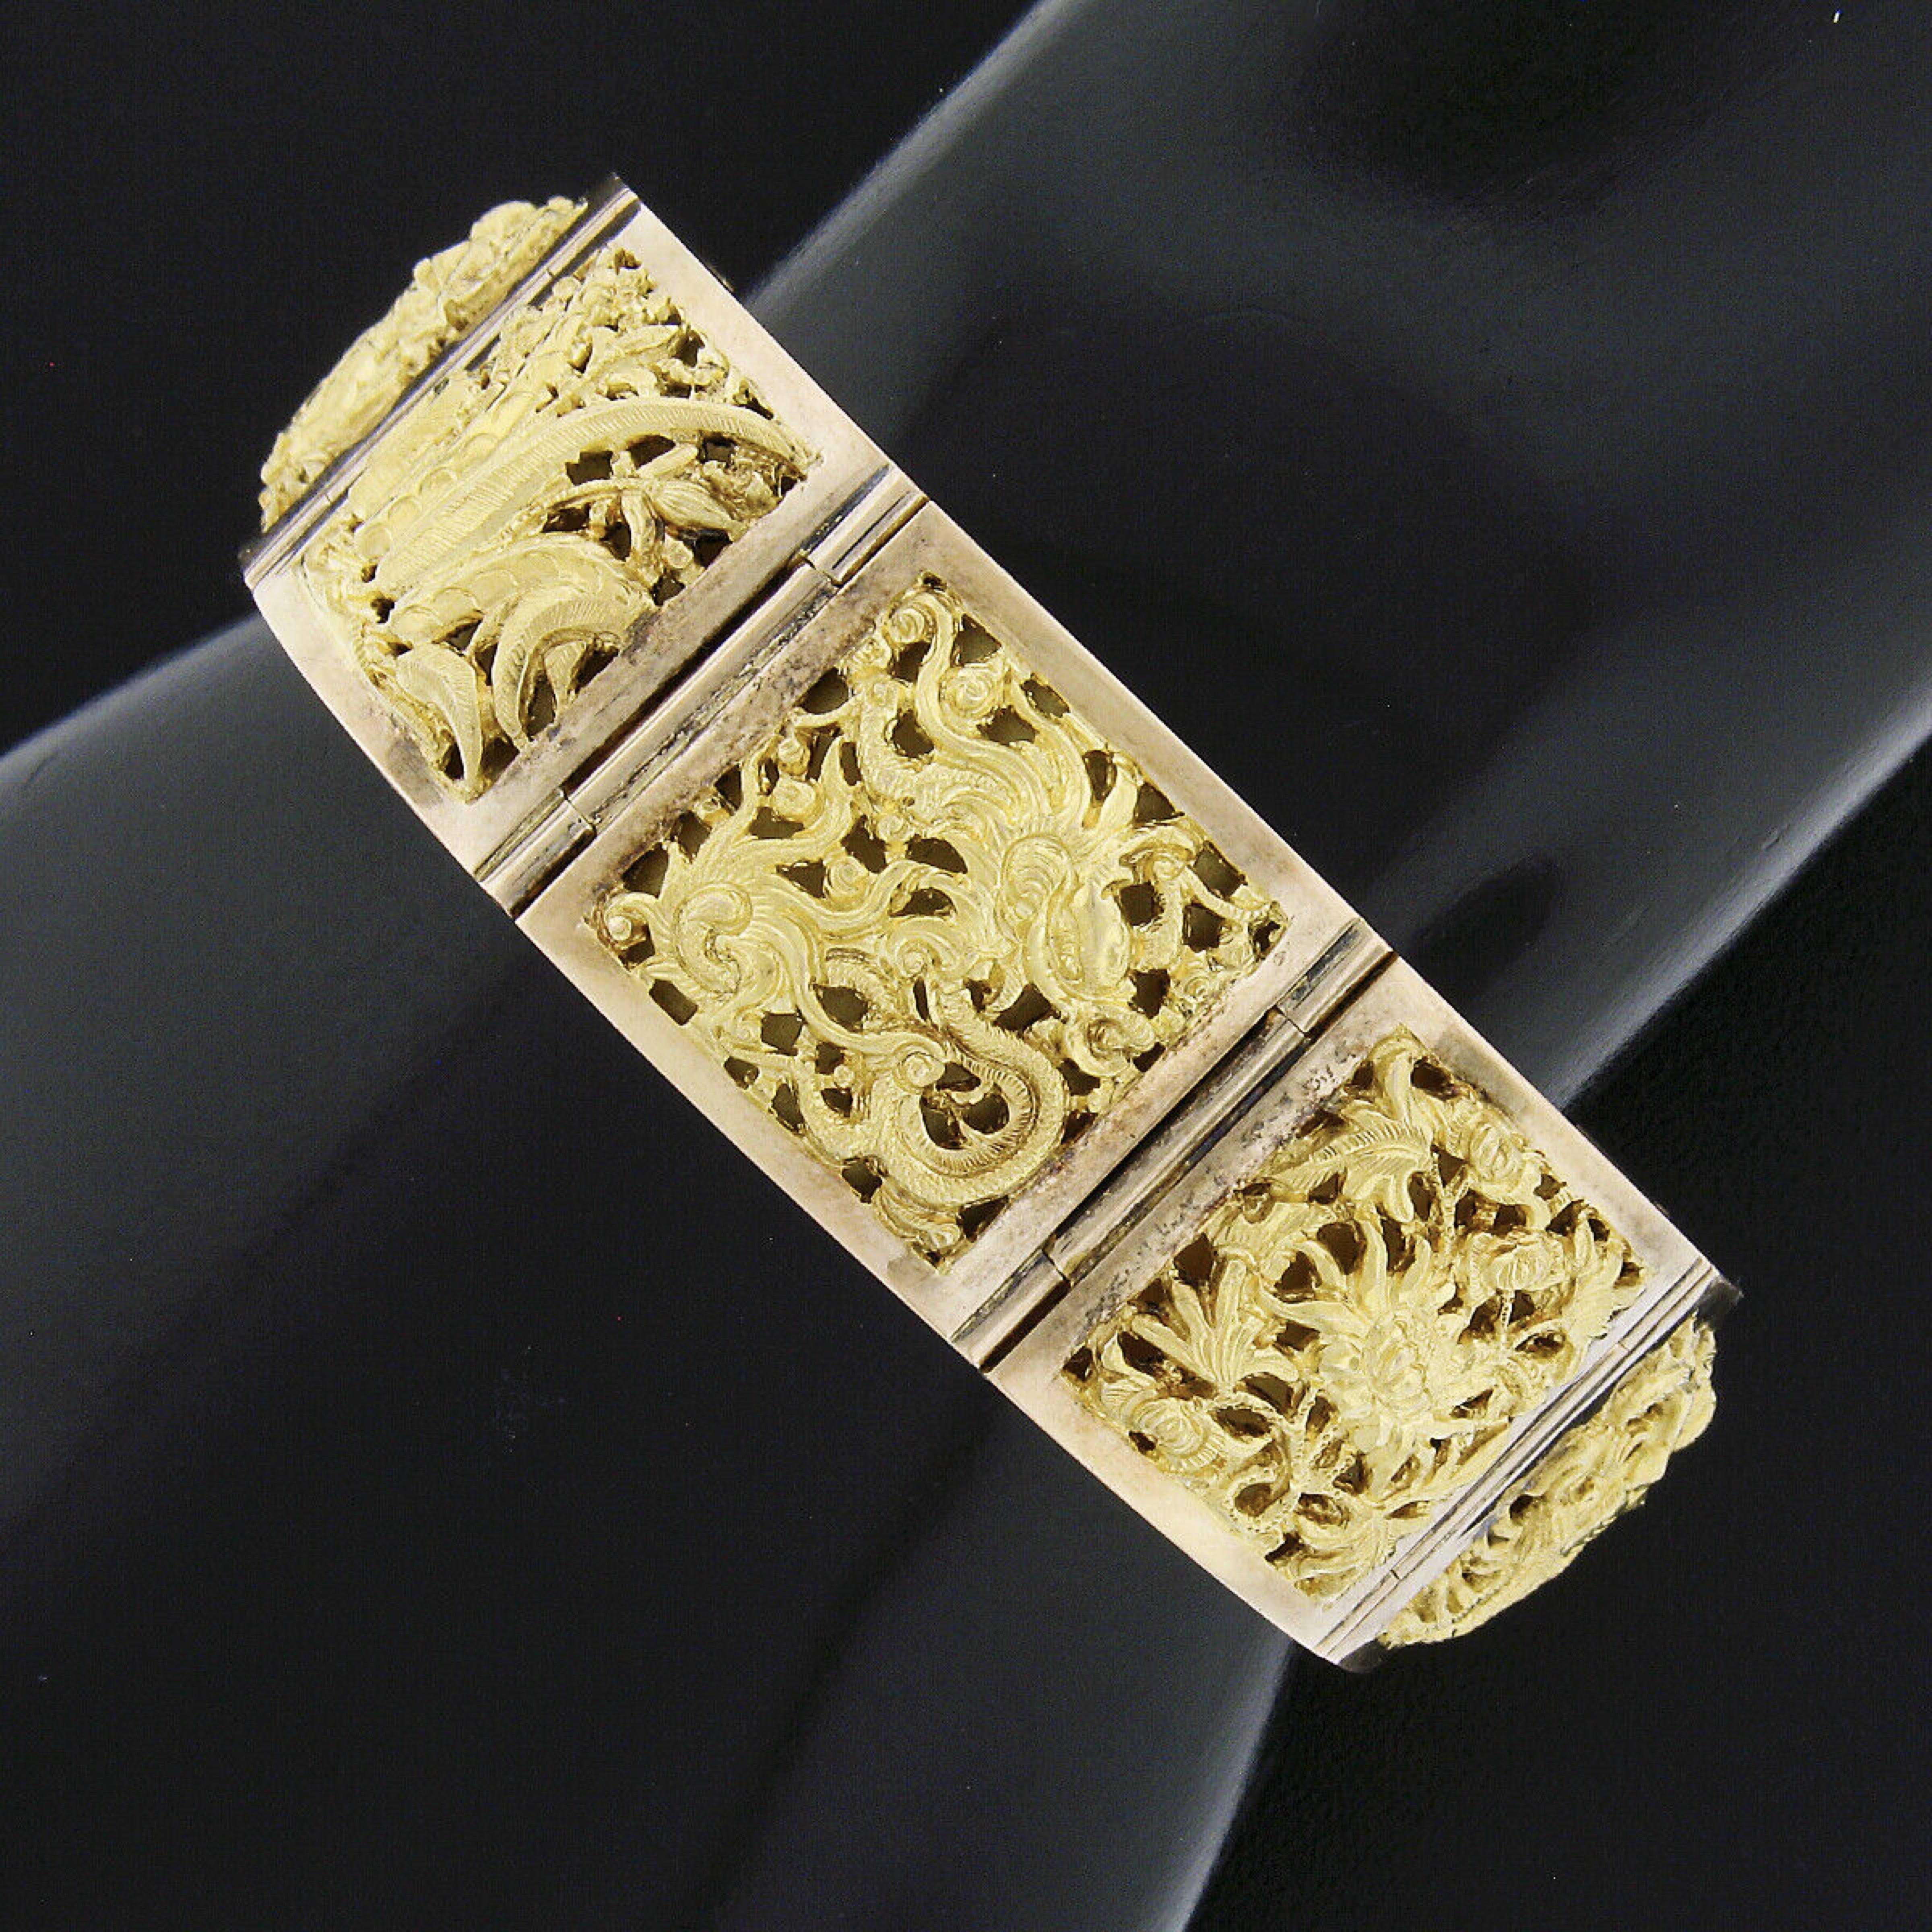 This absolutely stunning vintage bracelet was crafted from solid 18k yellow gold and features 8 intricately pierced panels with a nautical theme. The hinges between the panels are nice and tight indicating that the bracelet was likely barely worn.